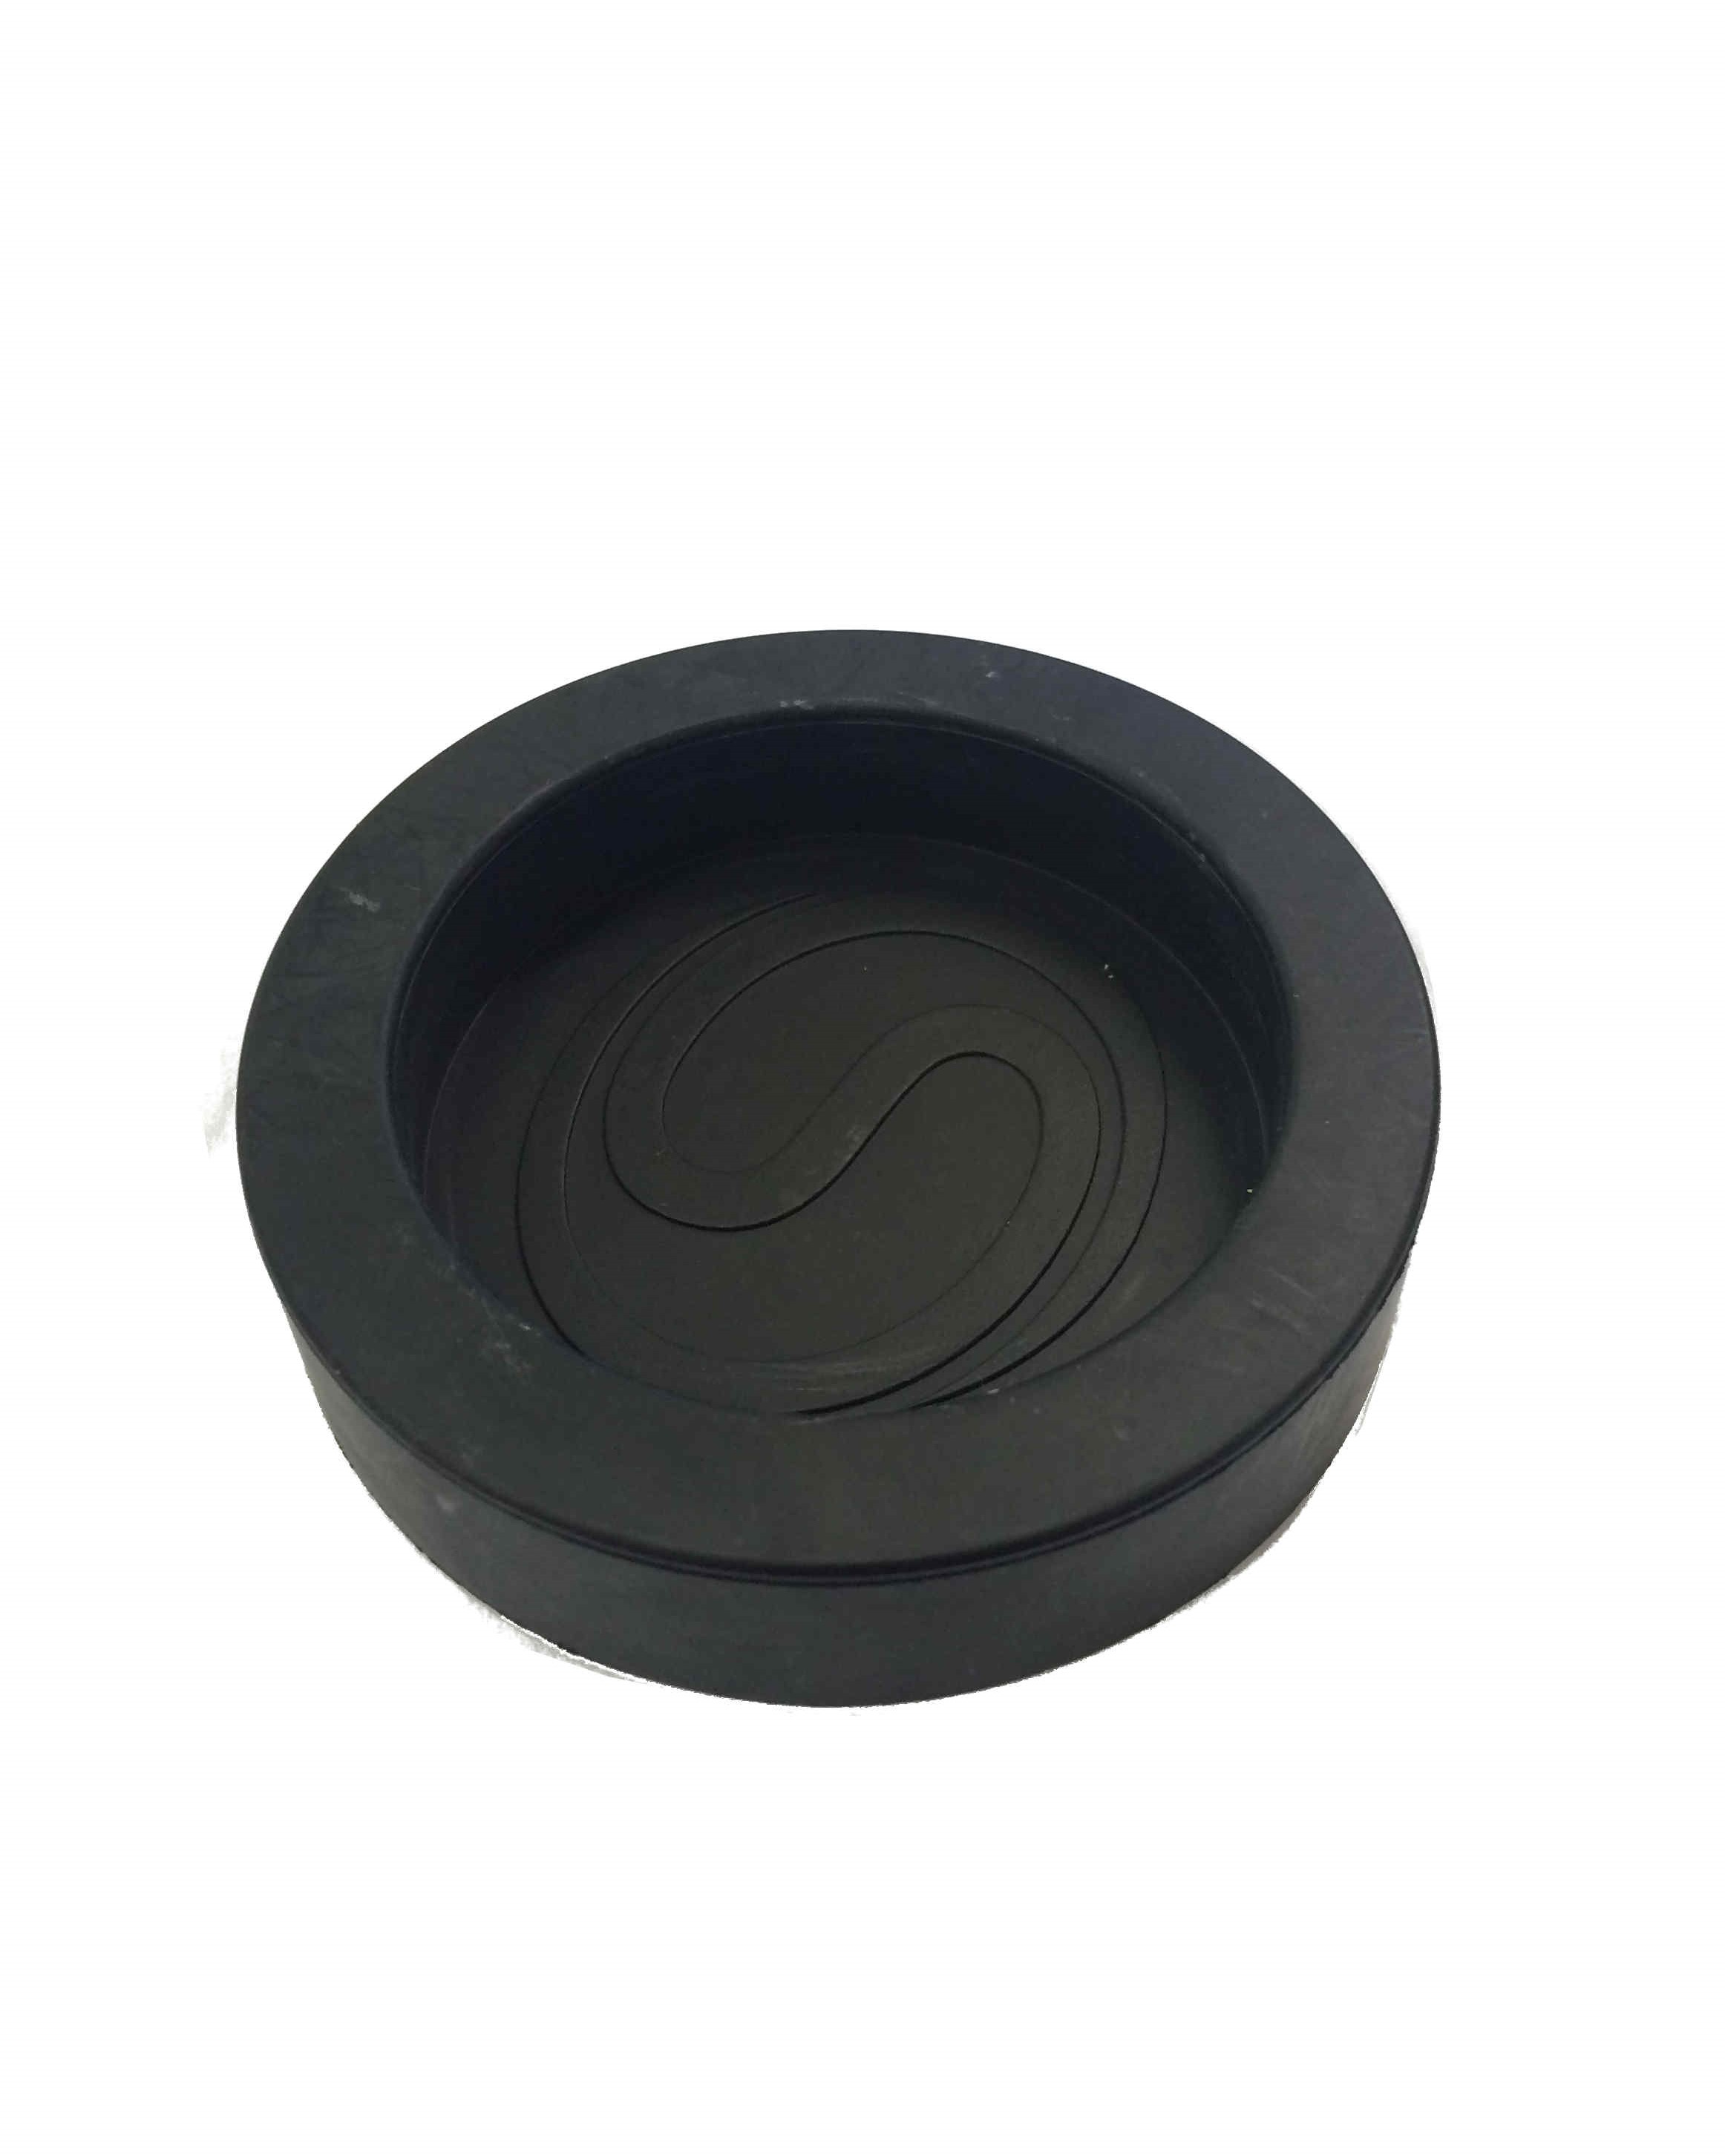 Rubber tamping seat